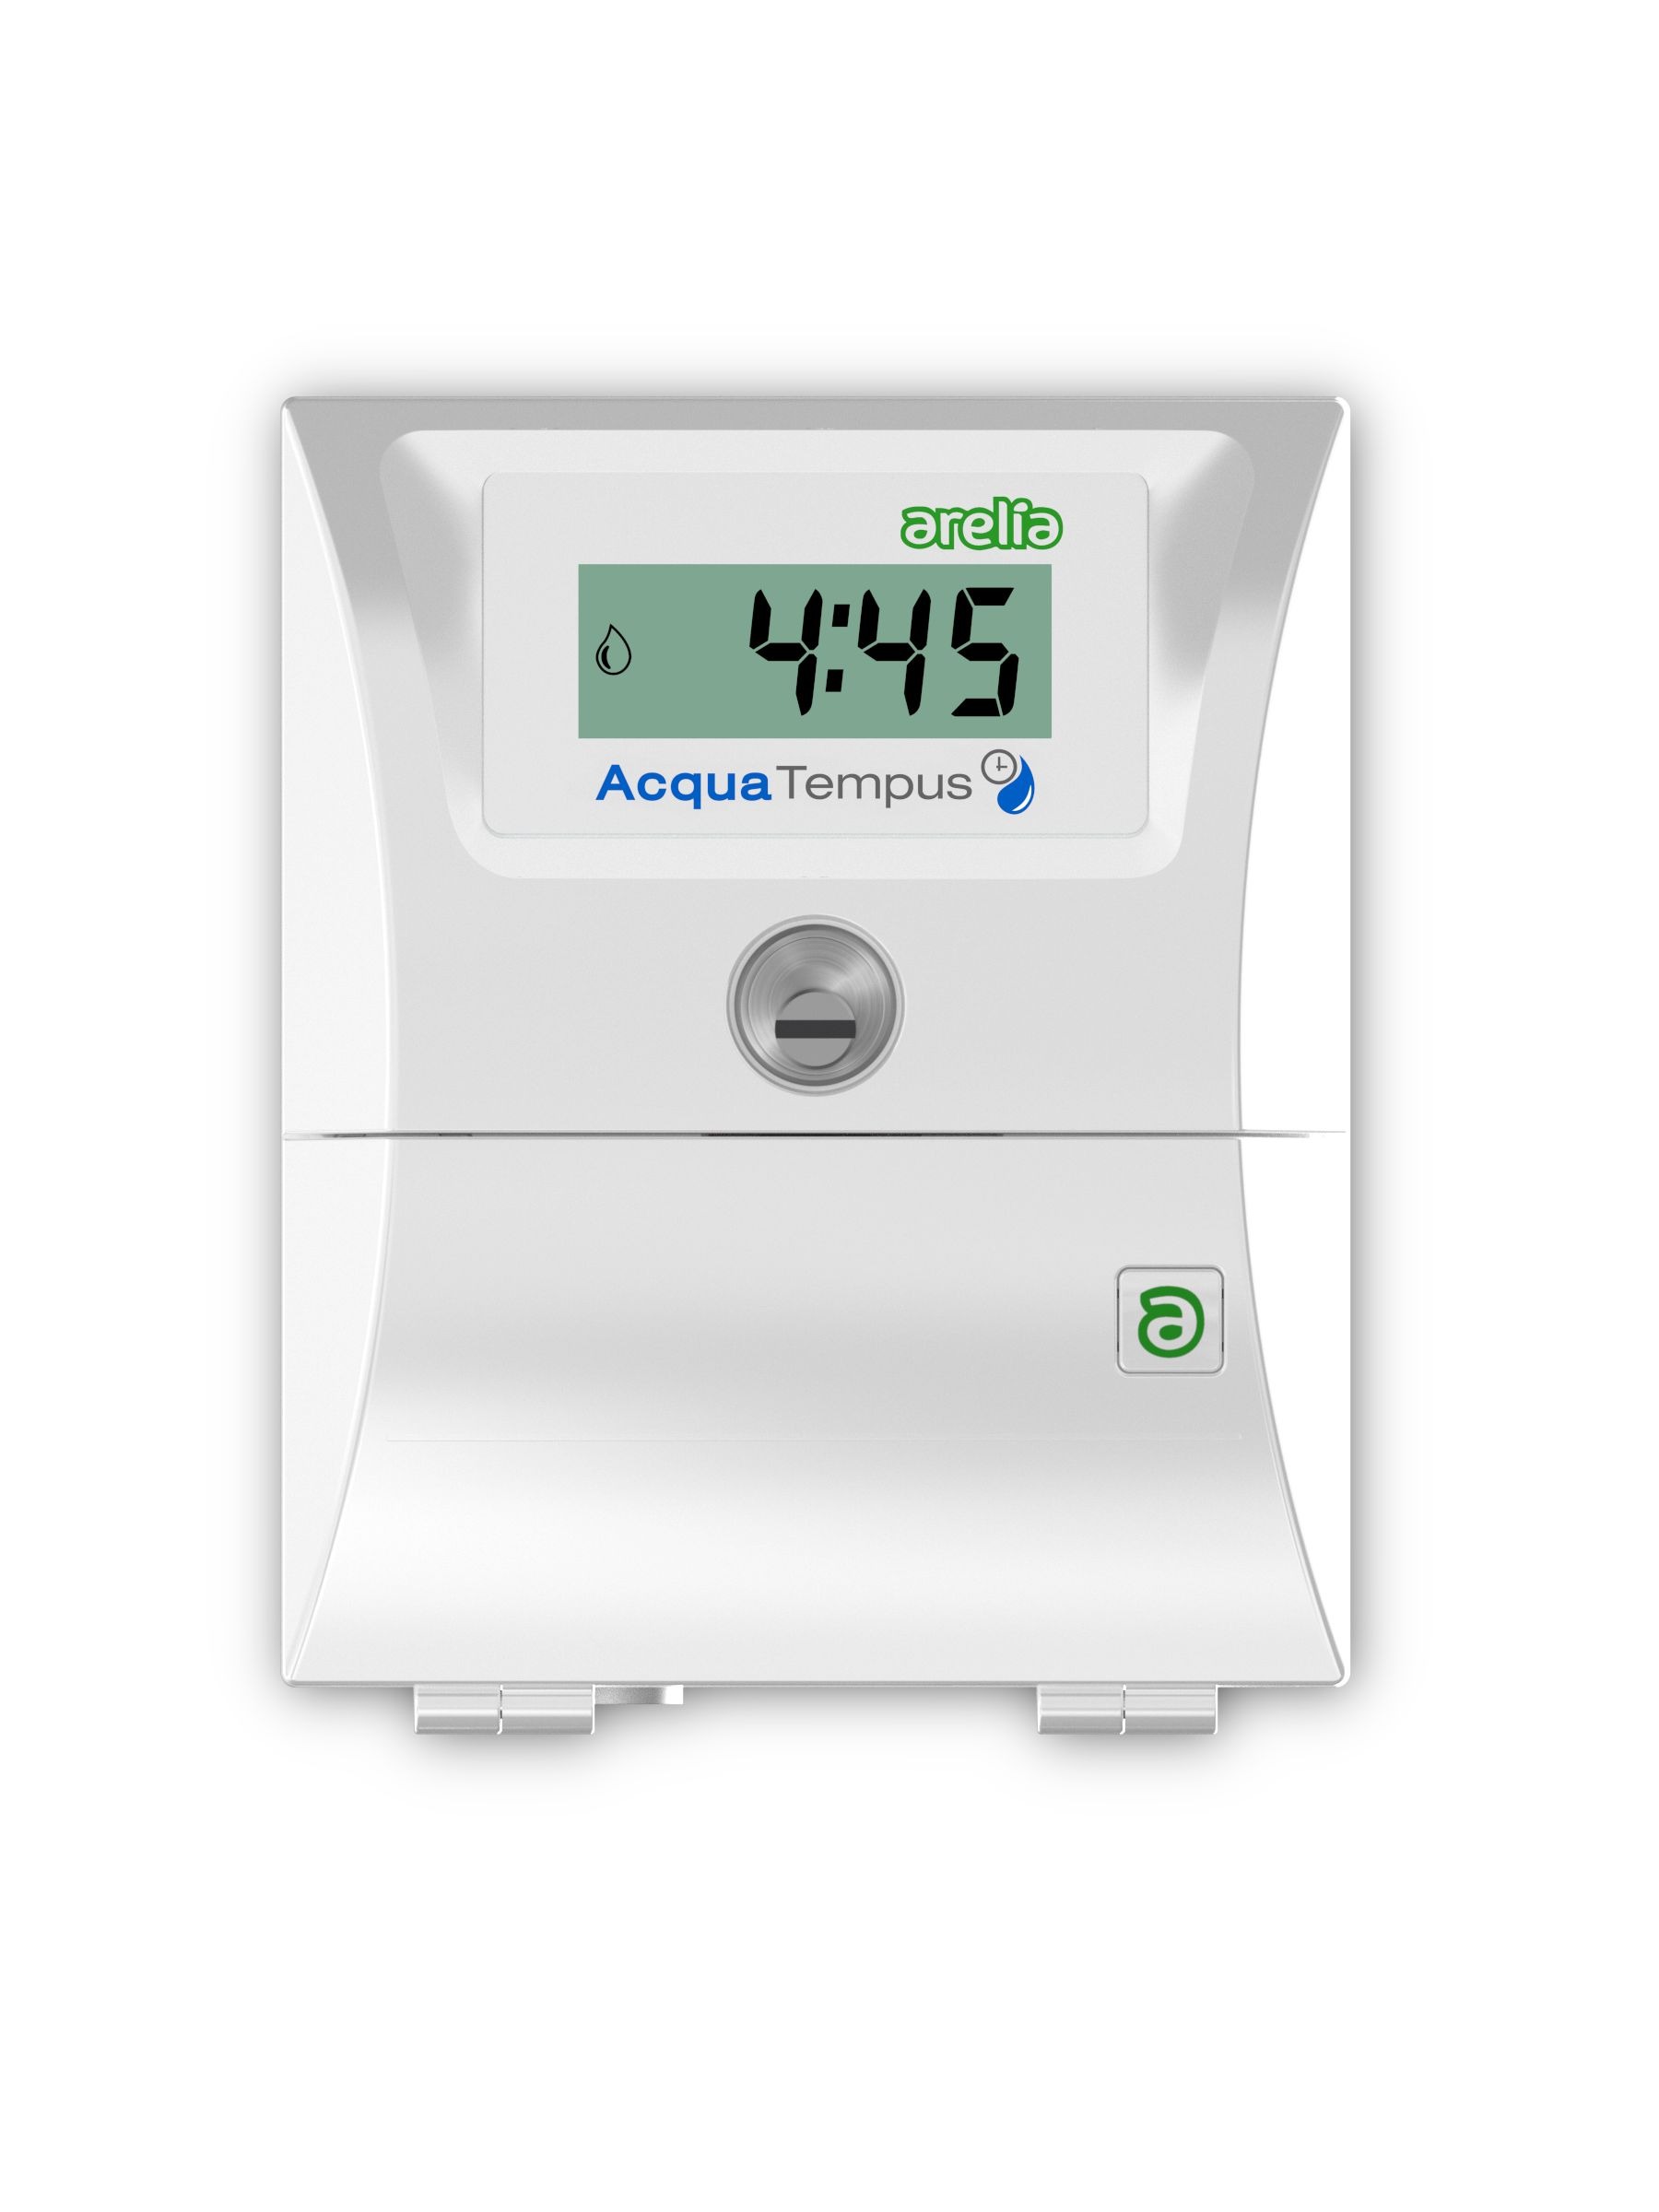 Shower Timer Acqua Tempus, with auto shut off (saving water and energy)